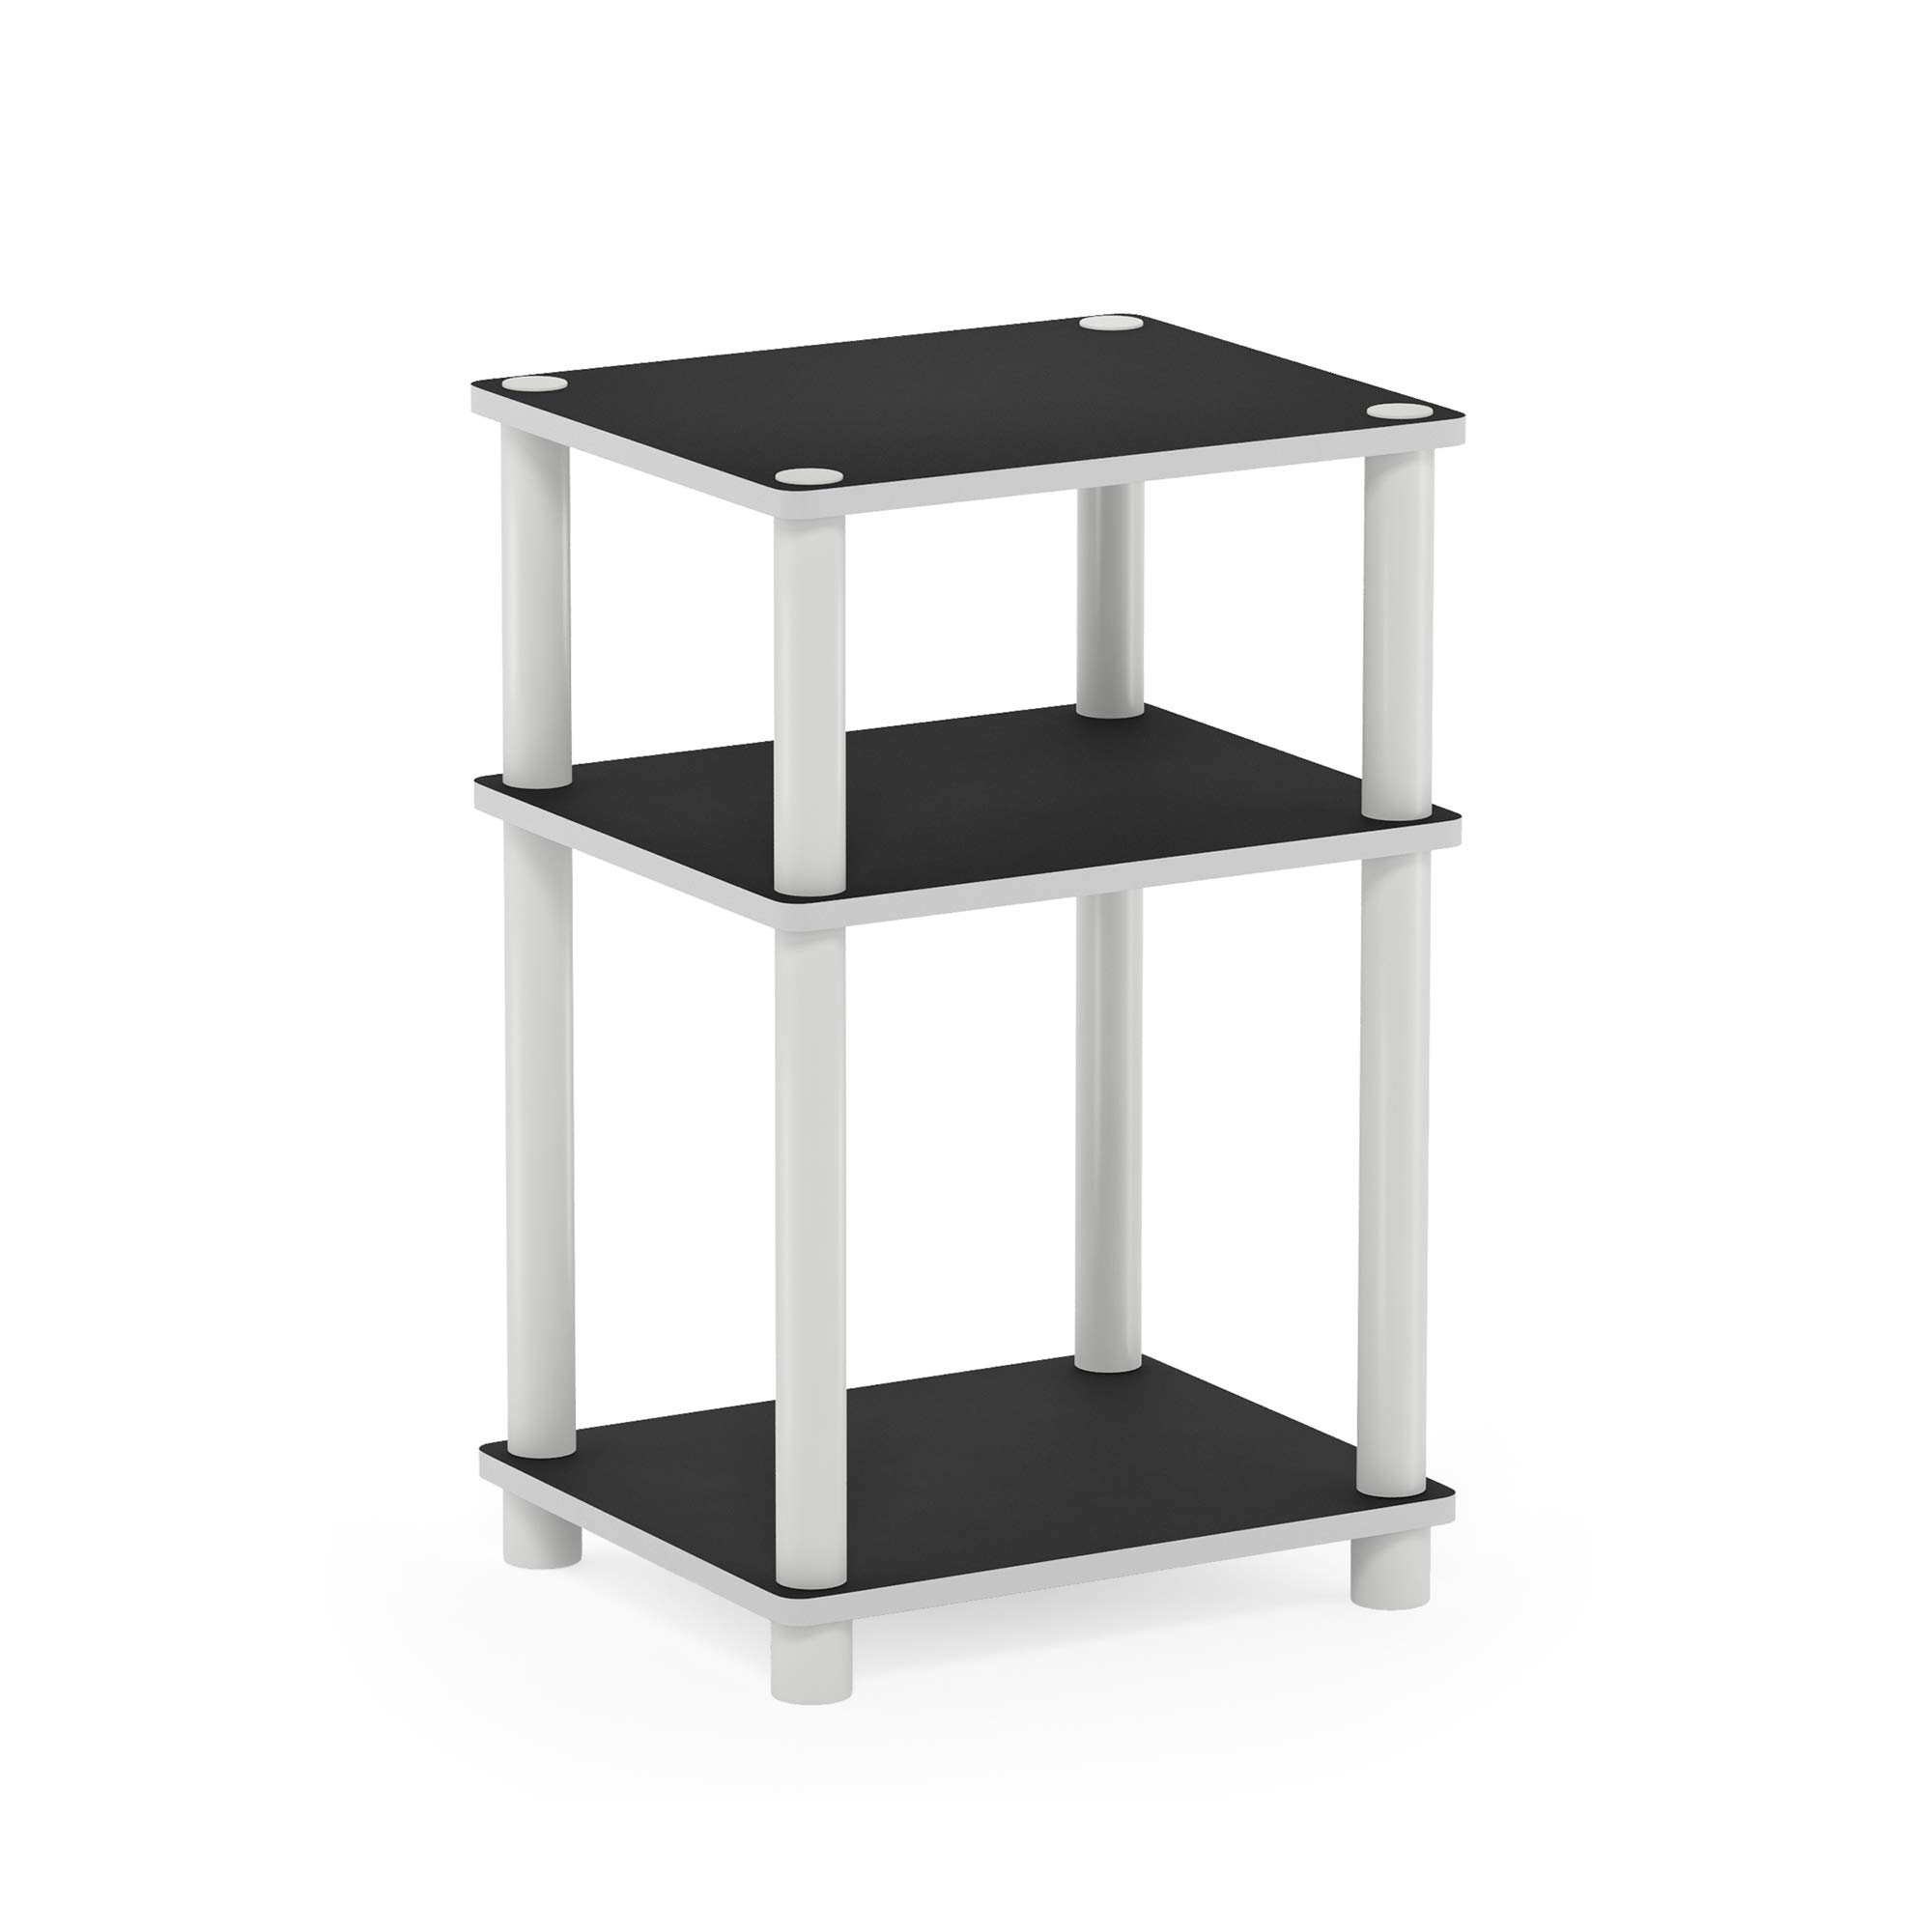 22.8" 3-Tier Furinno Turn-N-Tube Reversable Side Table (White/Espresso) $11.90 + Free Shipping w/ Prime or on $25+